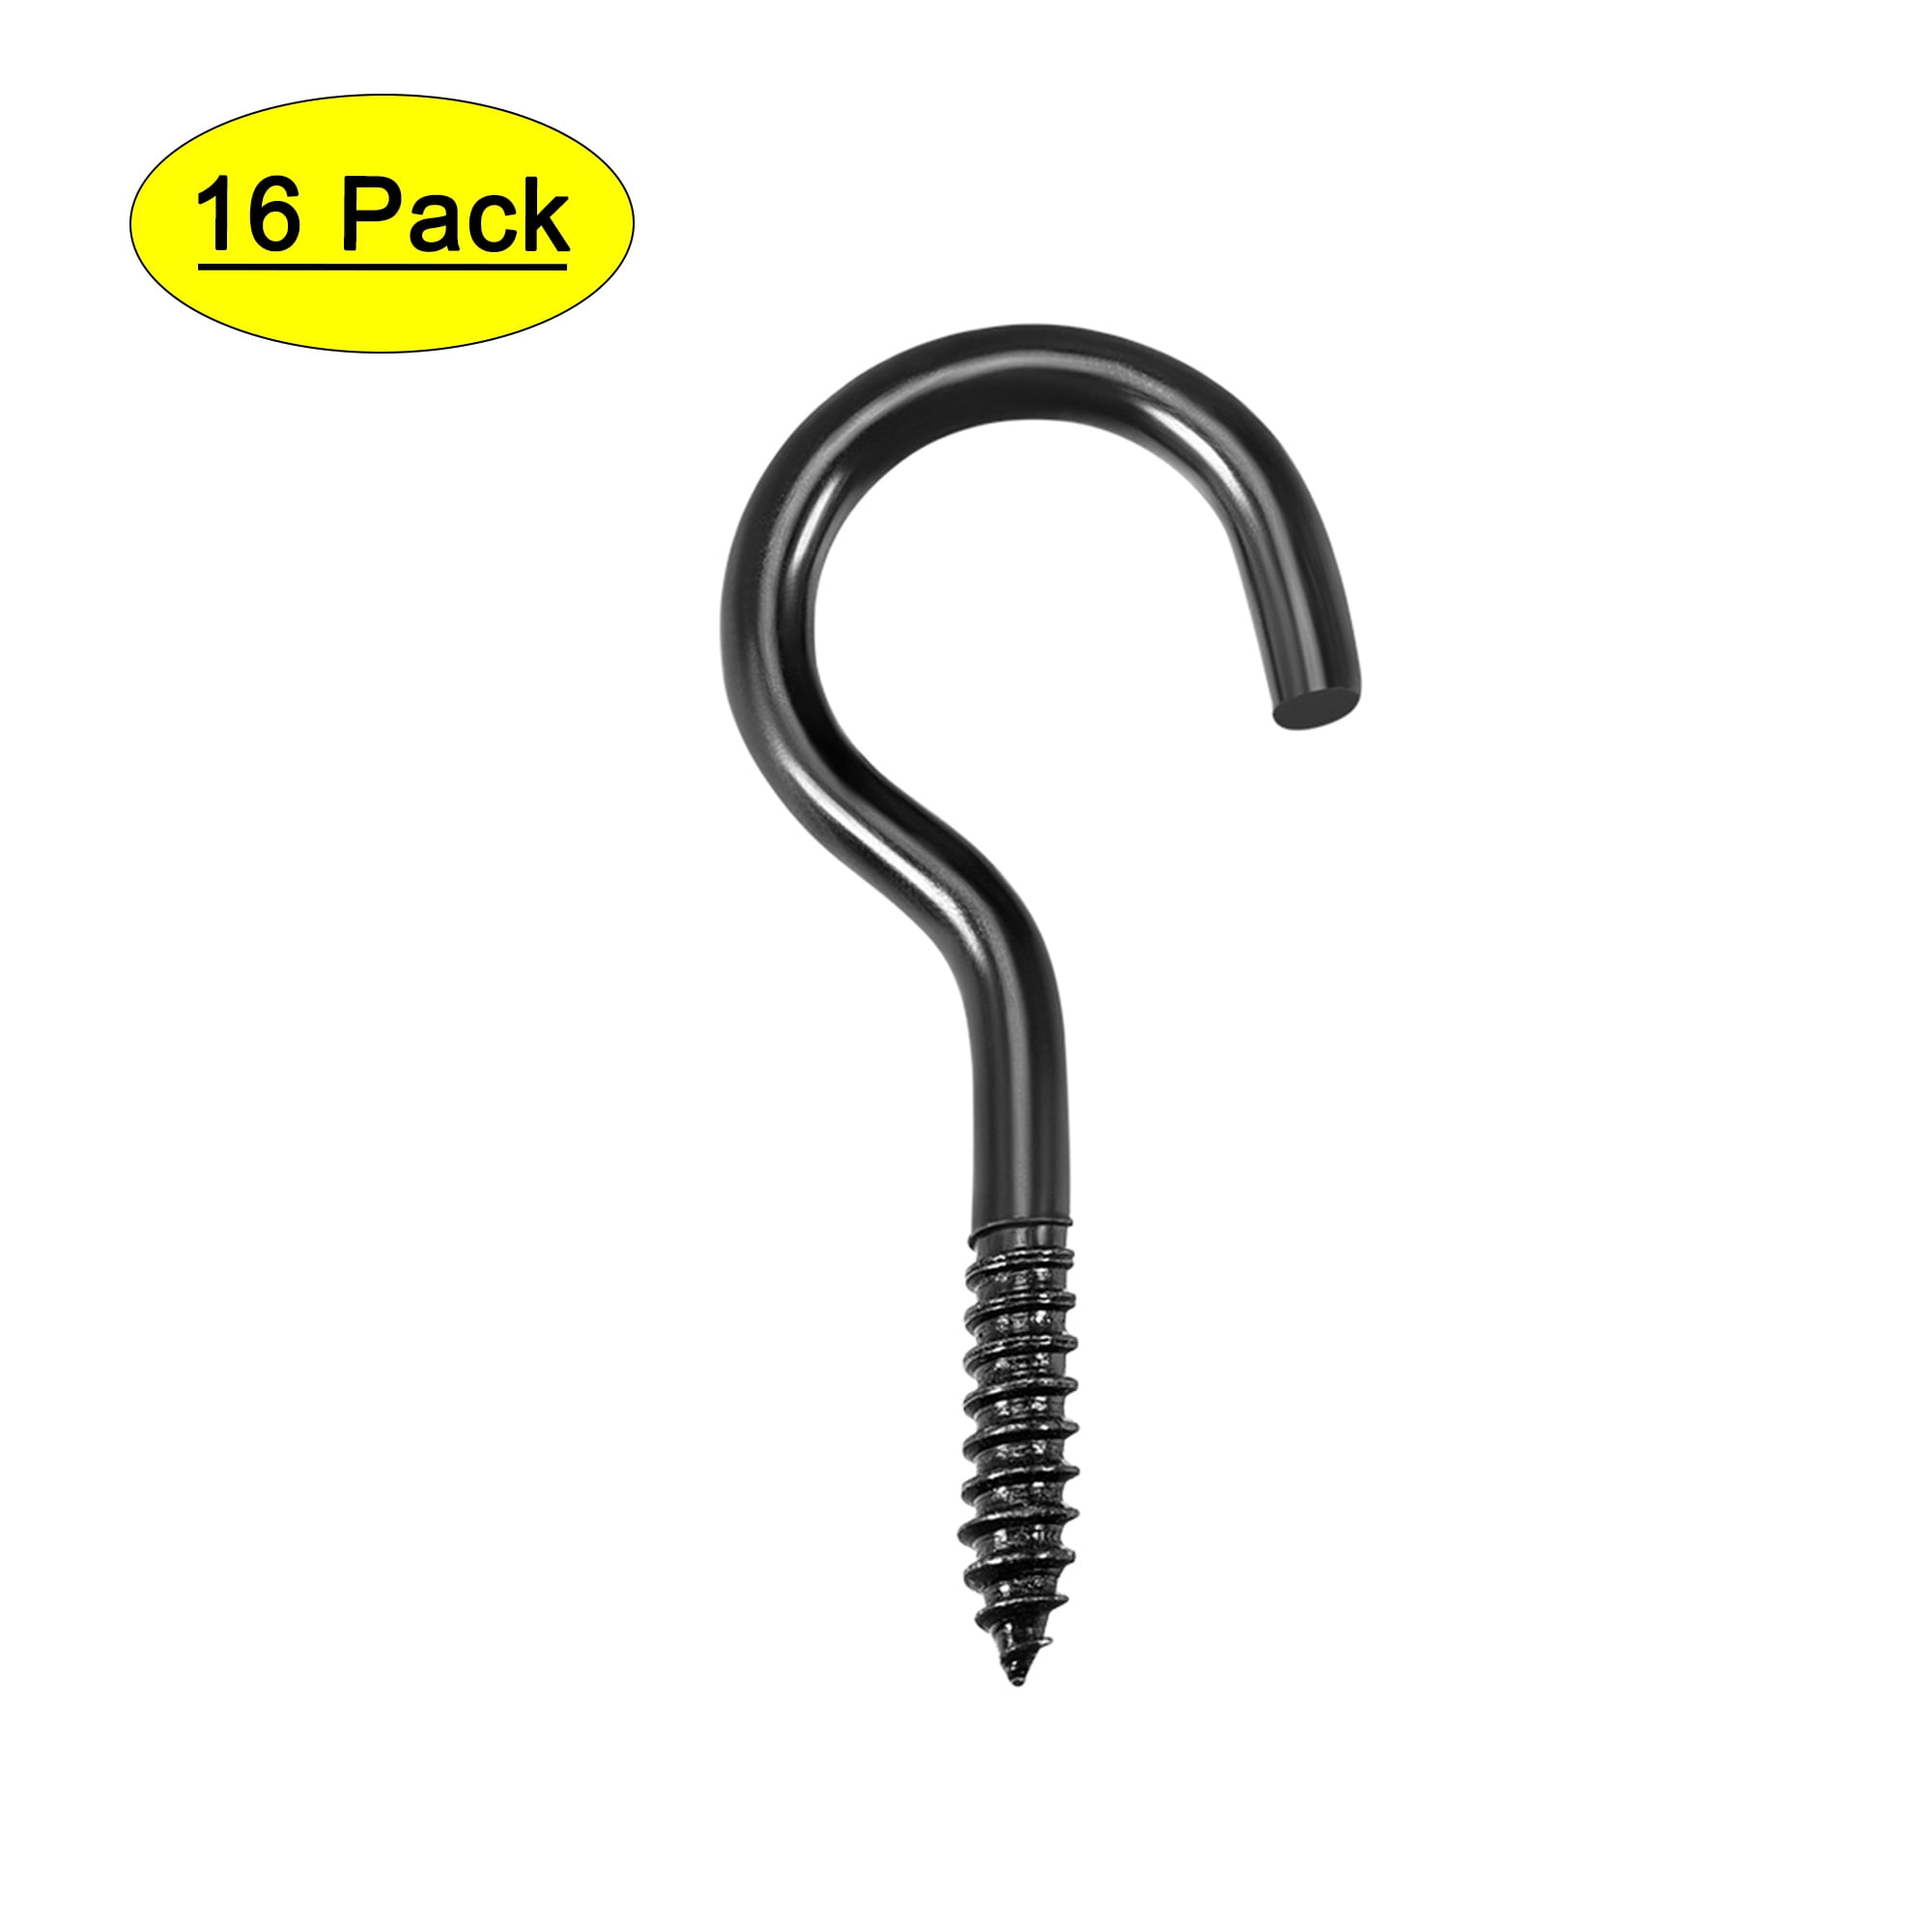 36pcs Sheep Eye Screw Self-tapping Hook Screw for Living Room Home Office Shop 